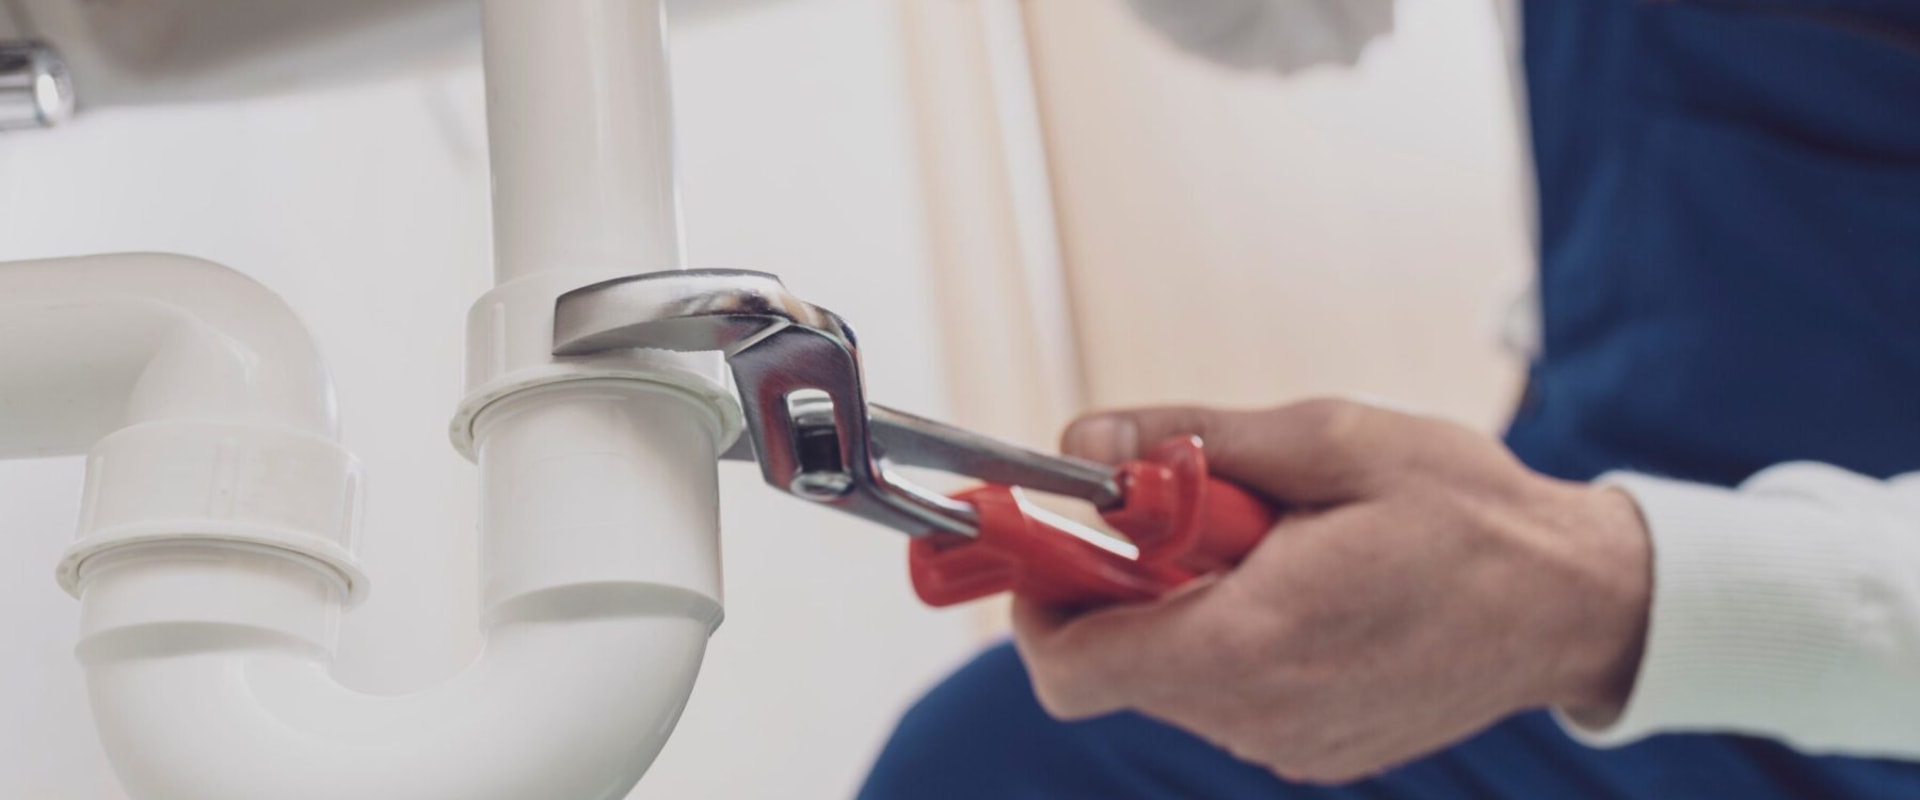 Residential Plumbing Companies: Everything You Need to Know